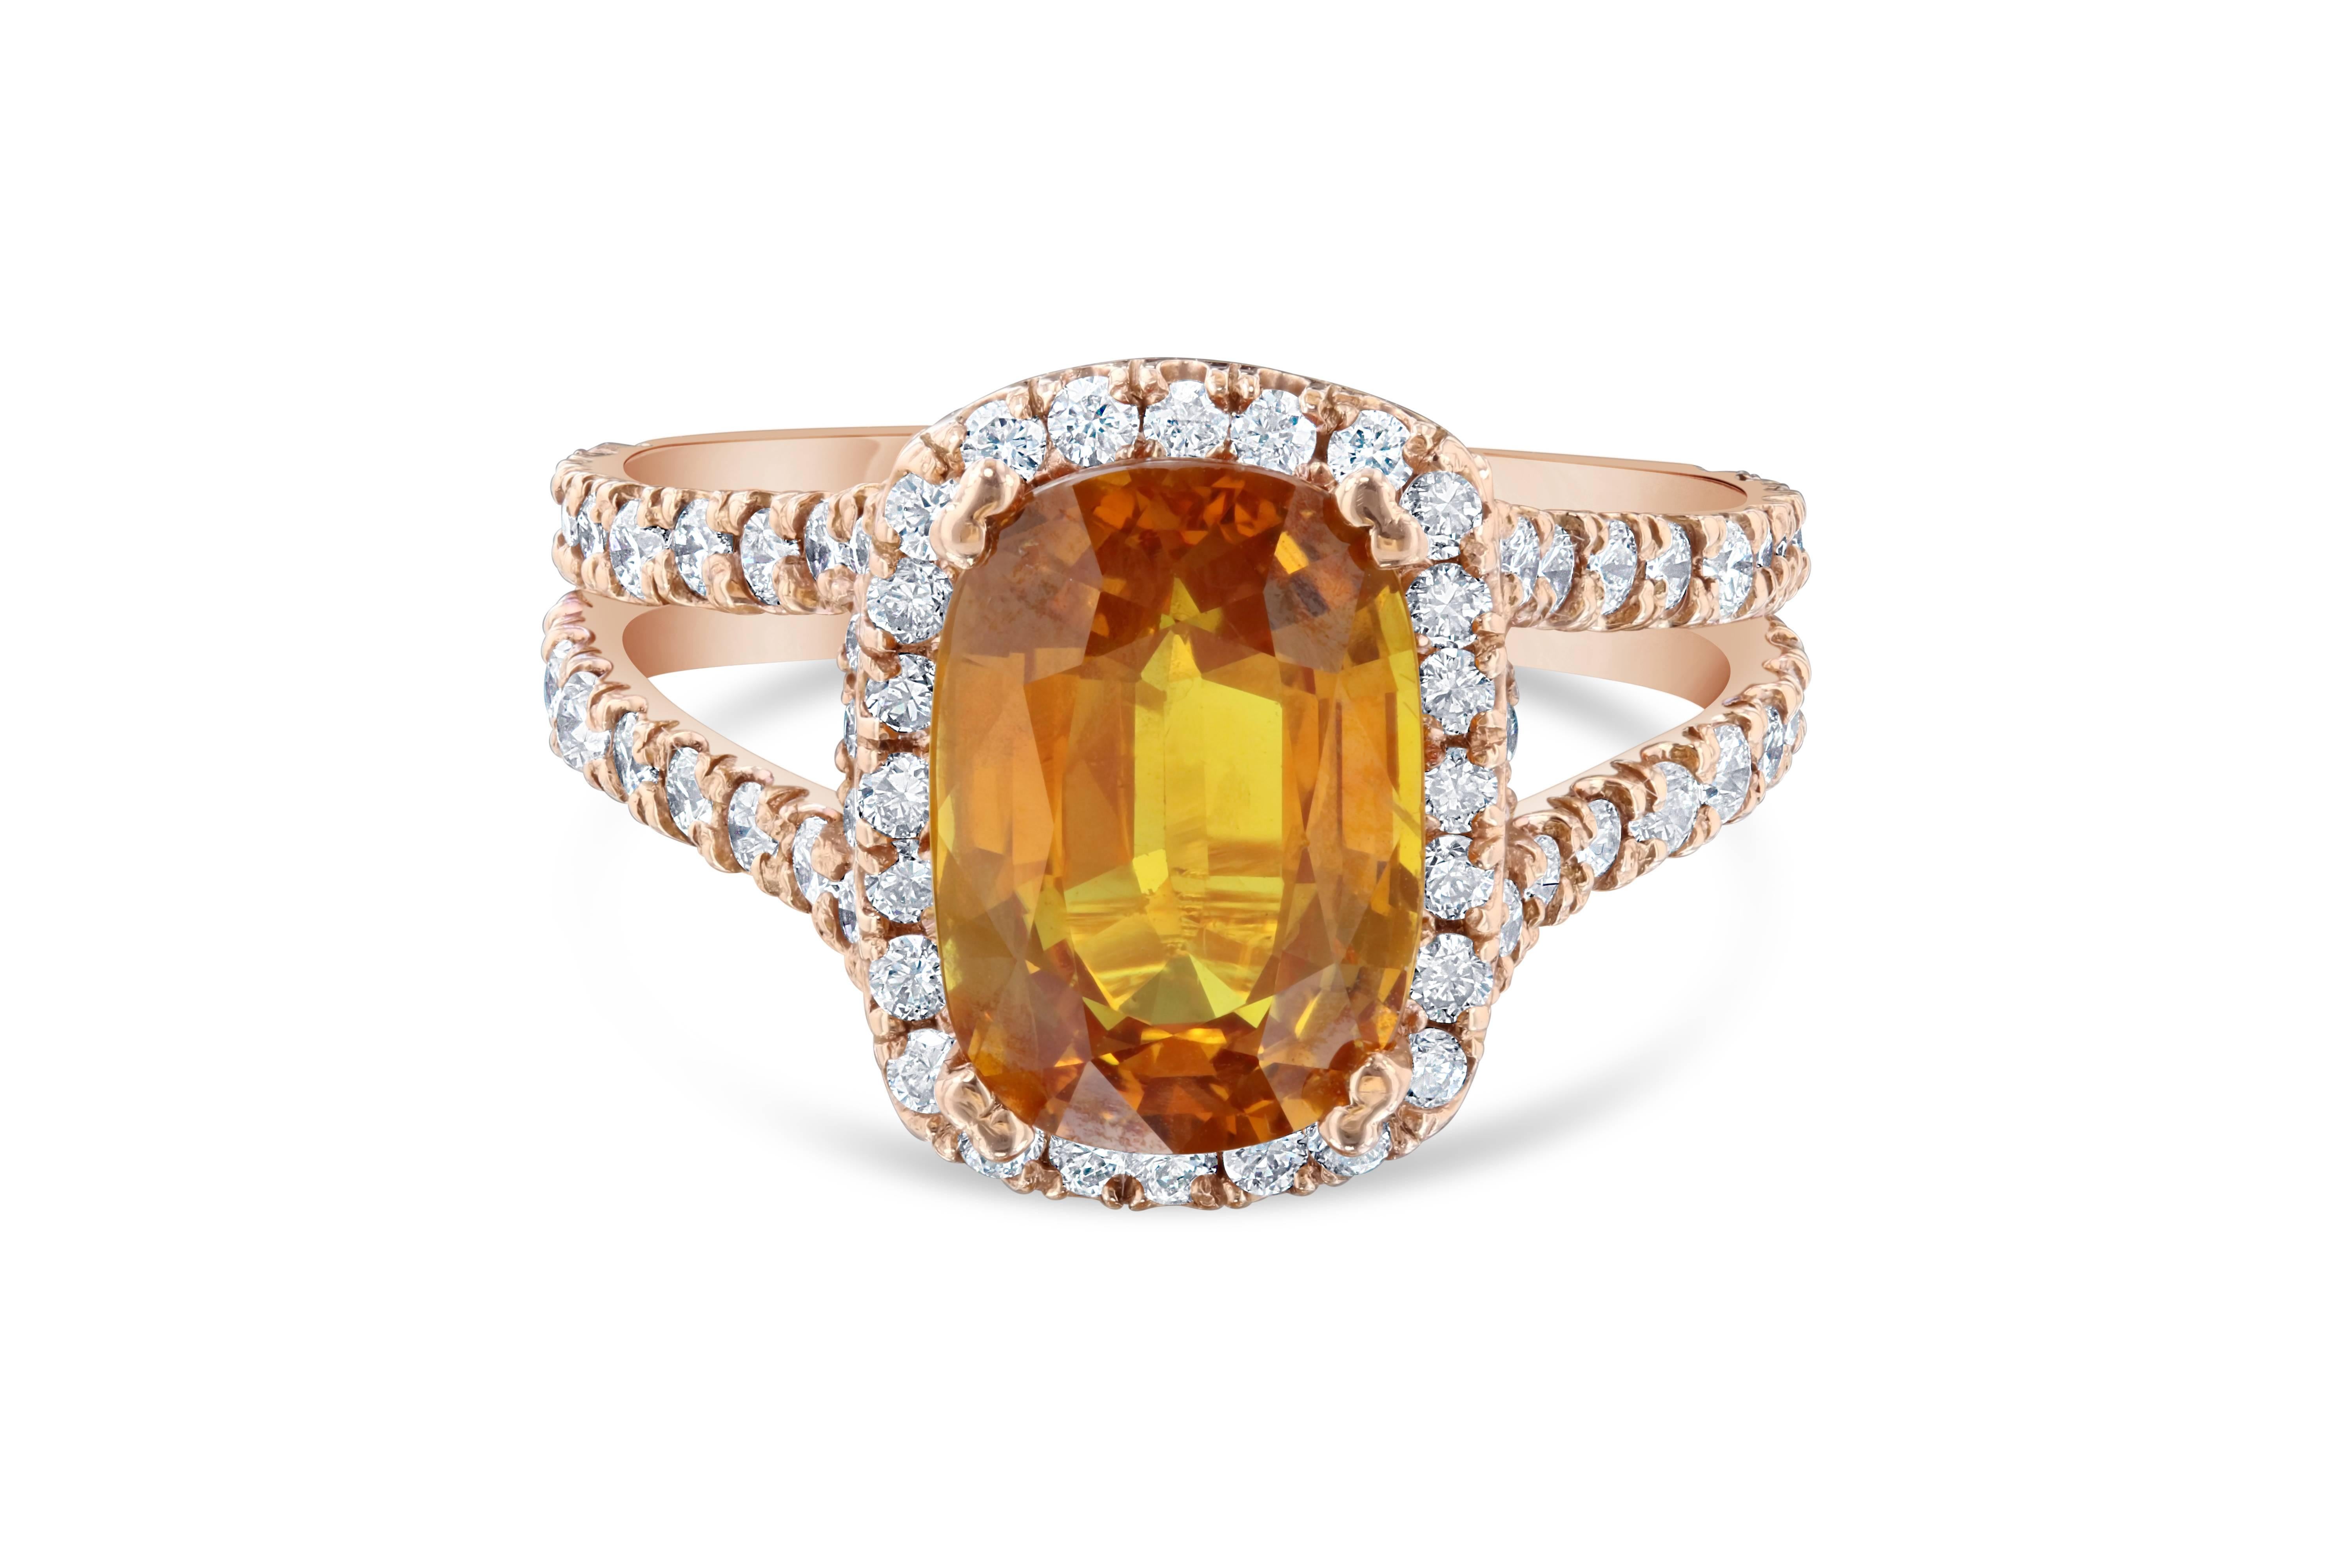 Stunning Orange Sapphire and Diamond ring made in a 14K Rose Gold Split Shank setting.  The ring has a 4.45 carat Orange Sapphire which is surrounded by a Halo of 92 Round Cut Diamonds that weigh 1.35 carats.  The ring size is 7.5 and can be